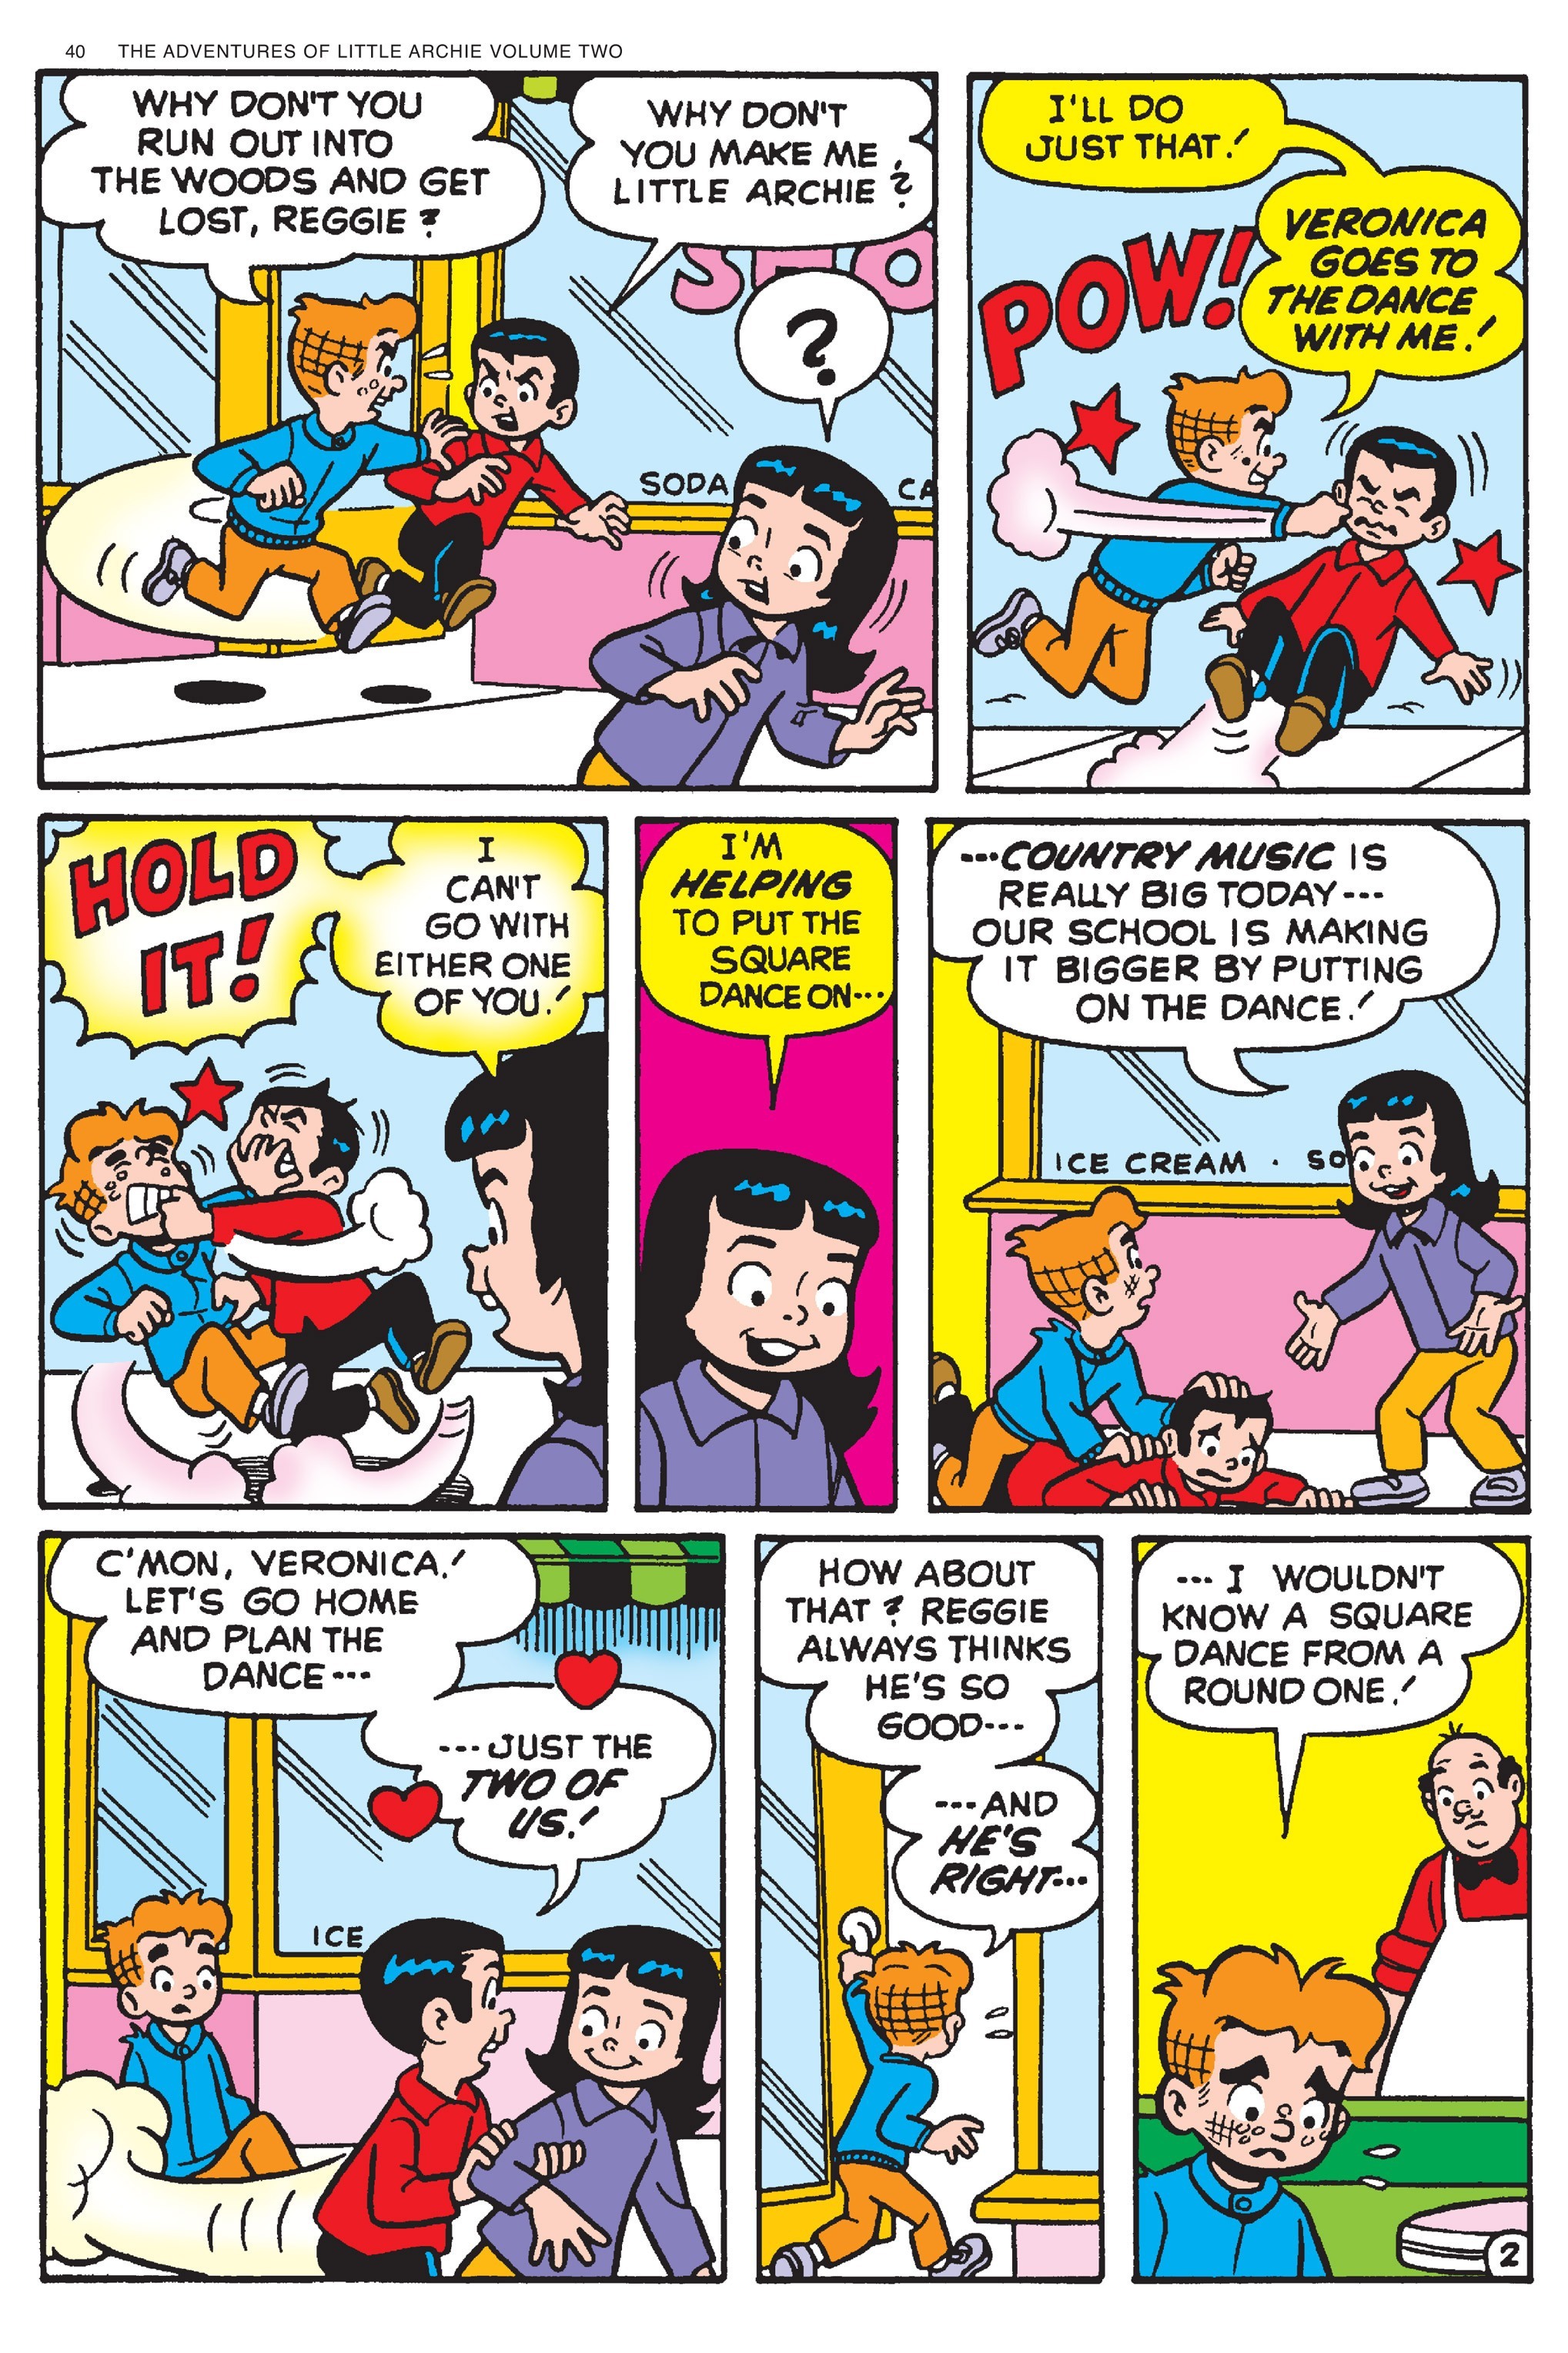 Read online Adventures of Little Archie comic -  Issue # TPB 2 - 41